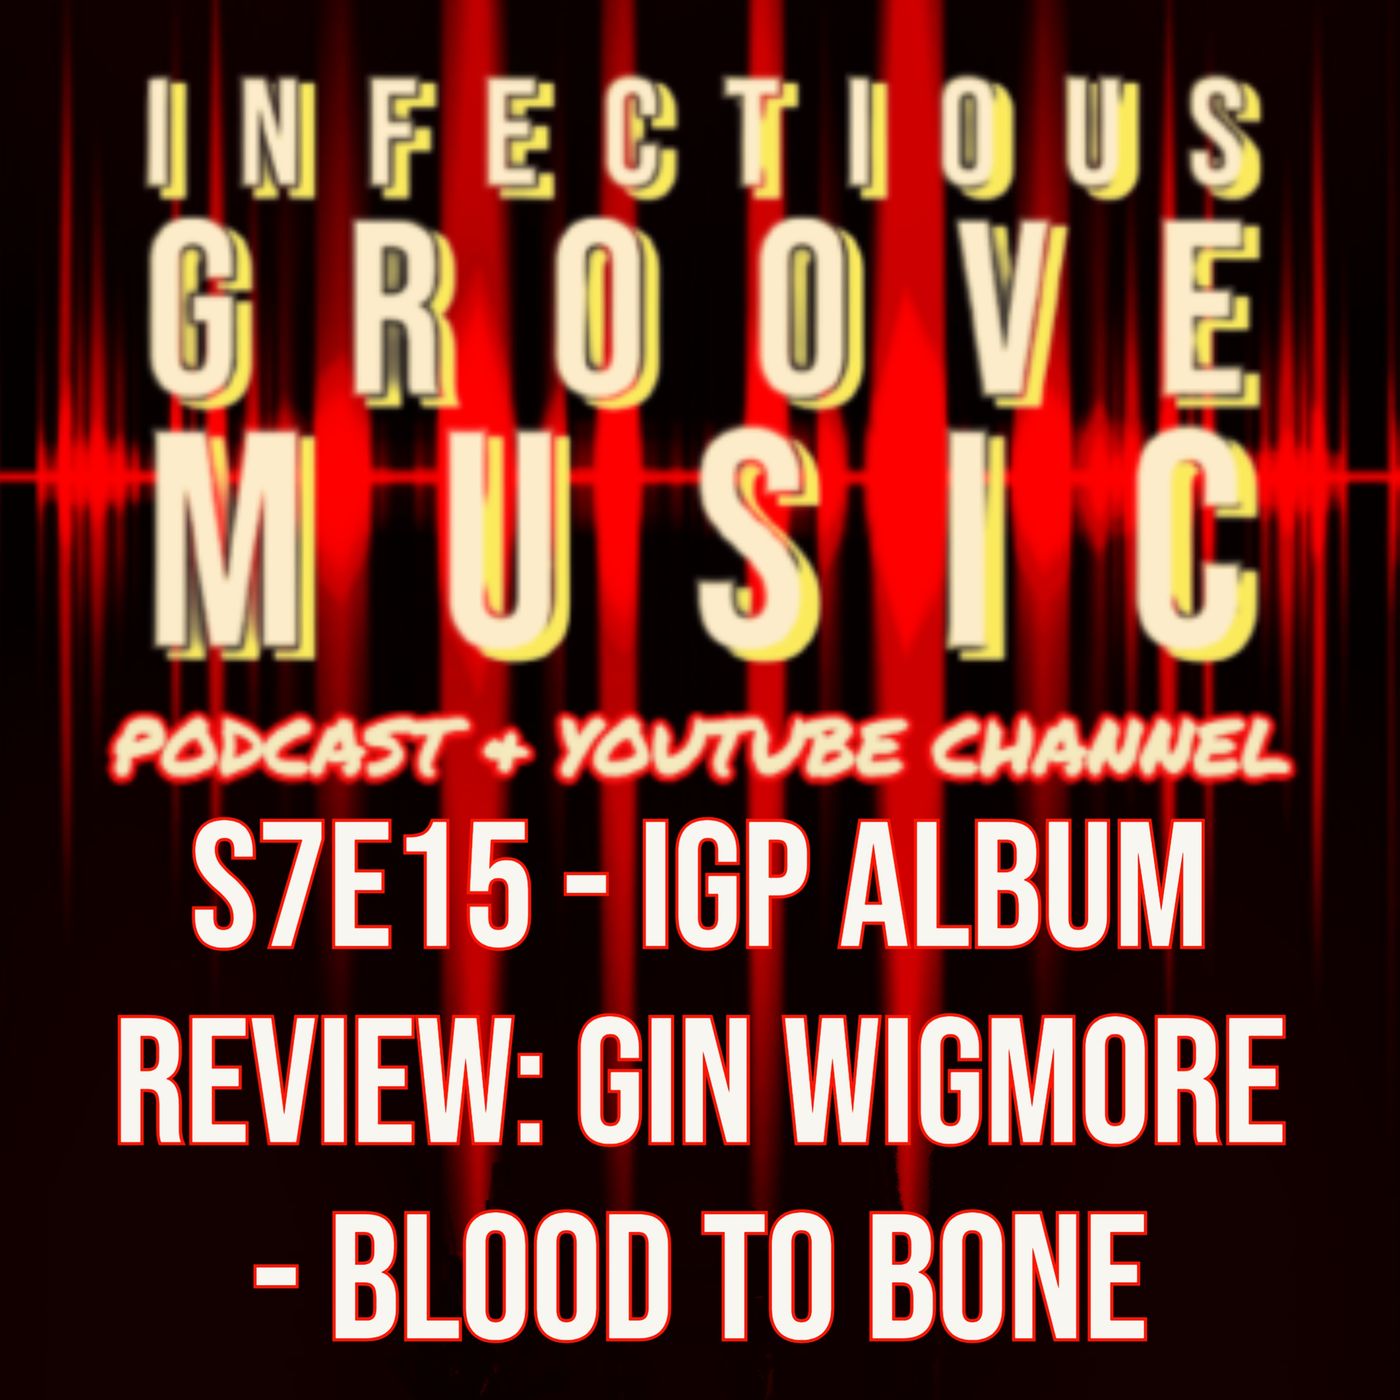 IGP Album Review: Gin Wigmore - Blood To Bone